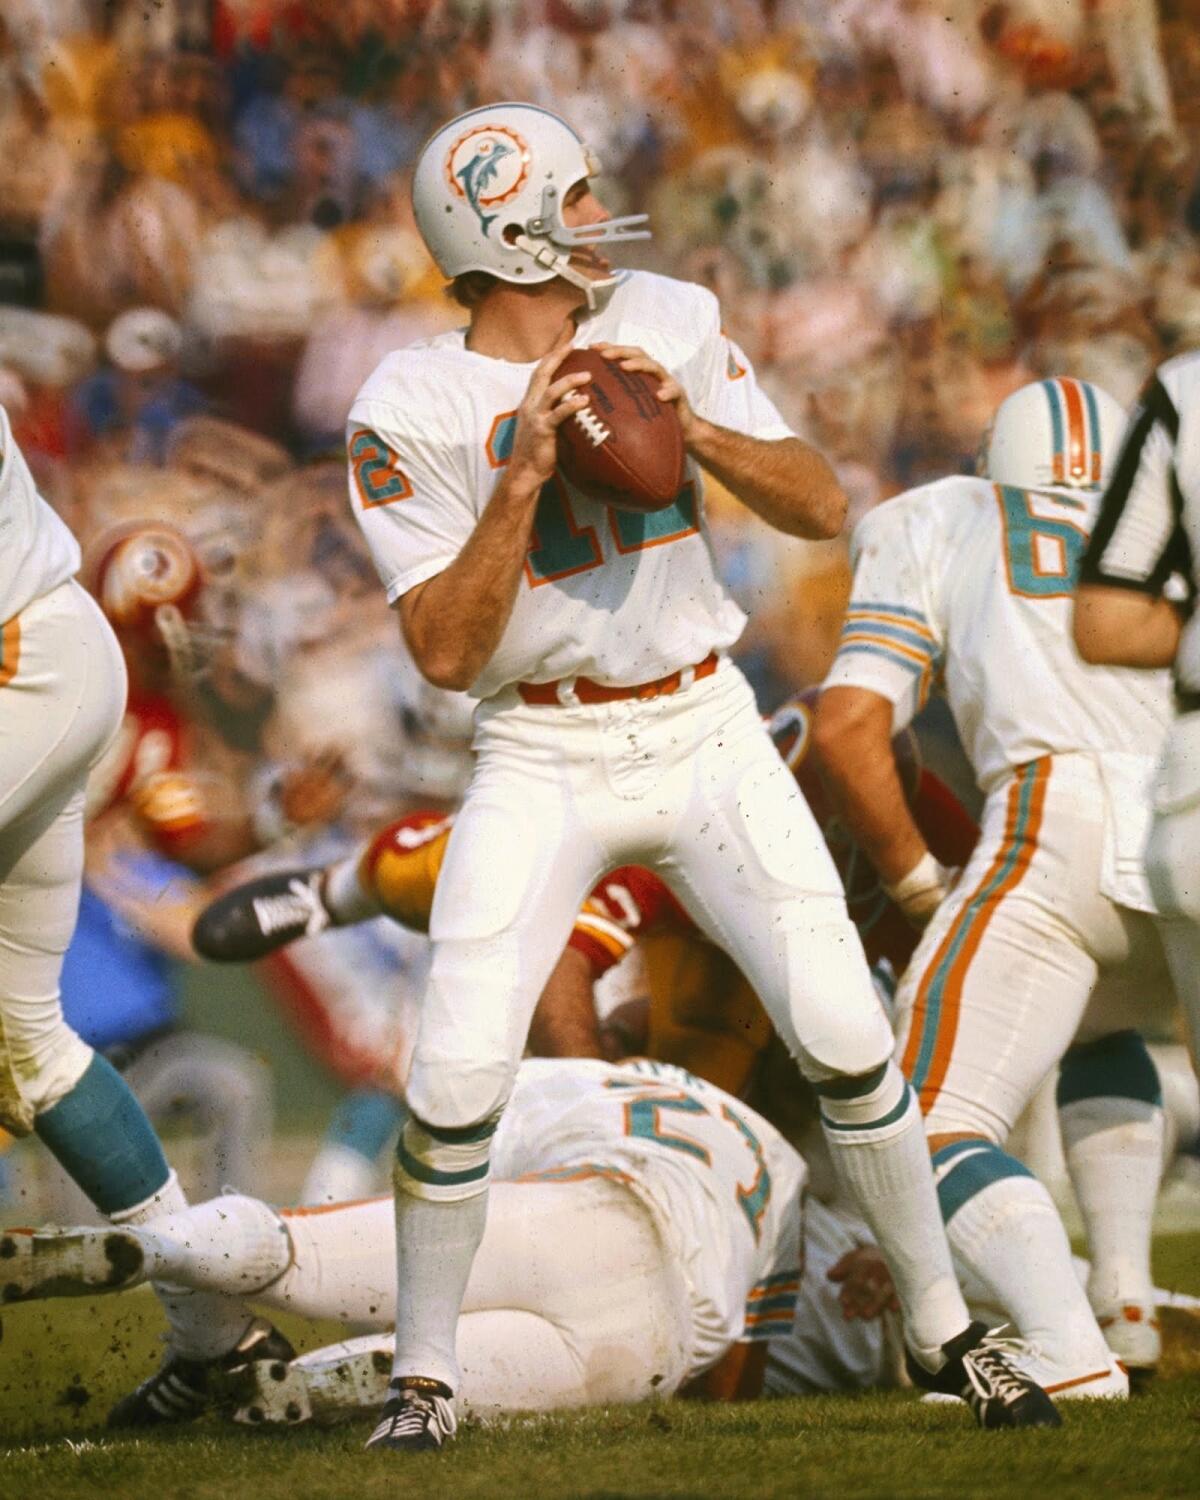 Former NFL quarterback Bob Griese, who led the Miami Dolphins to two Super Bowl victories in the 1970s, will join the party Sunday at Westgate Las Vegas.